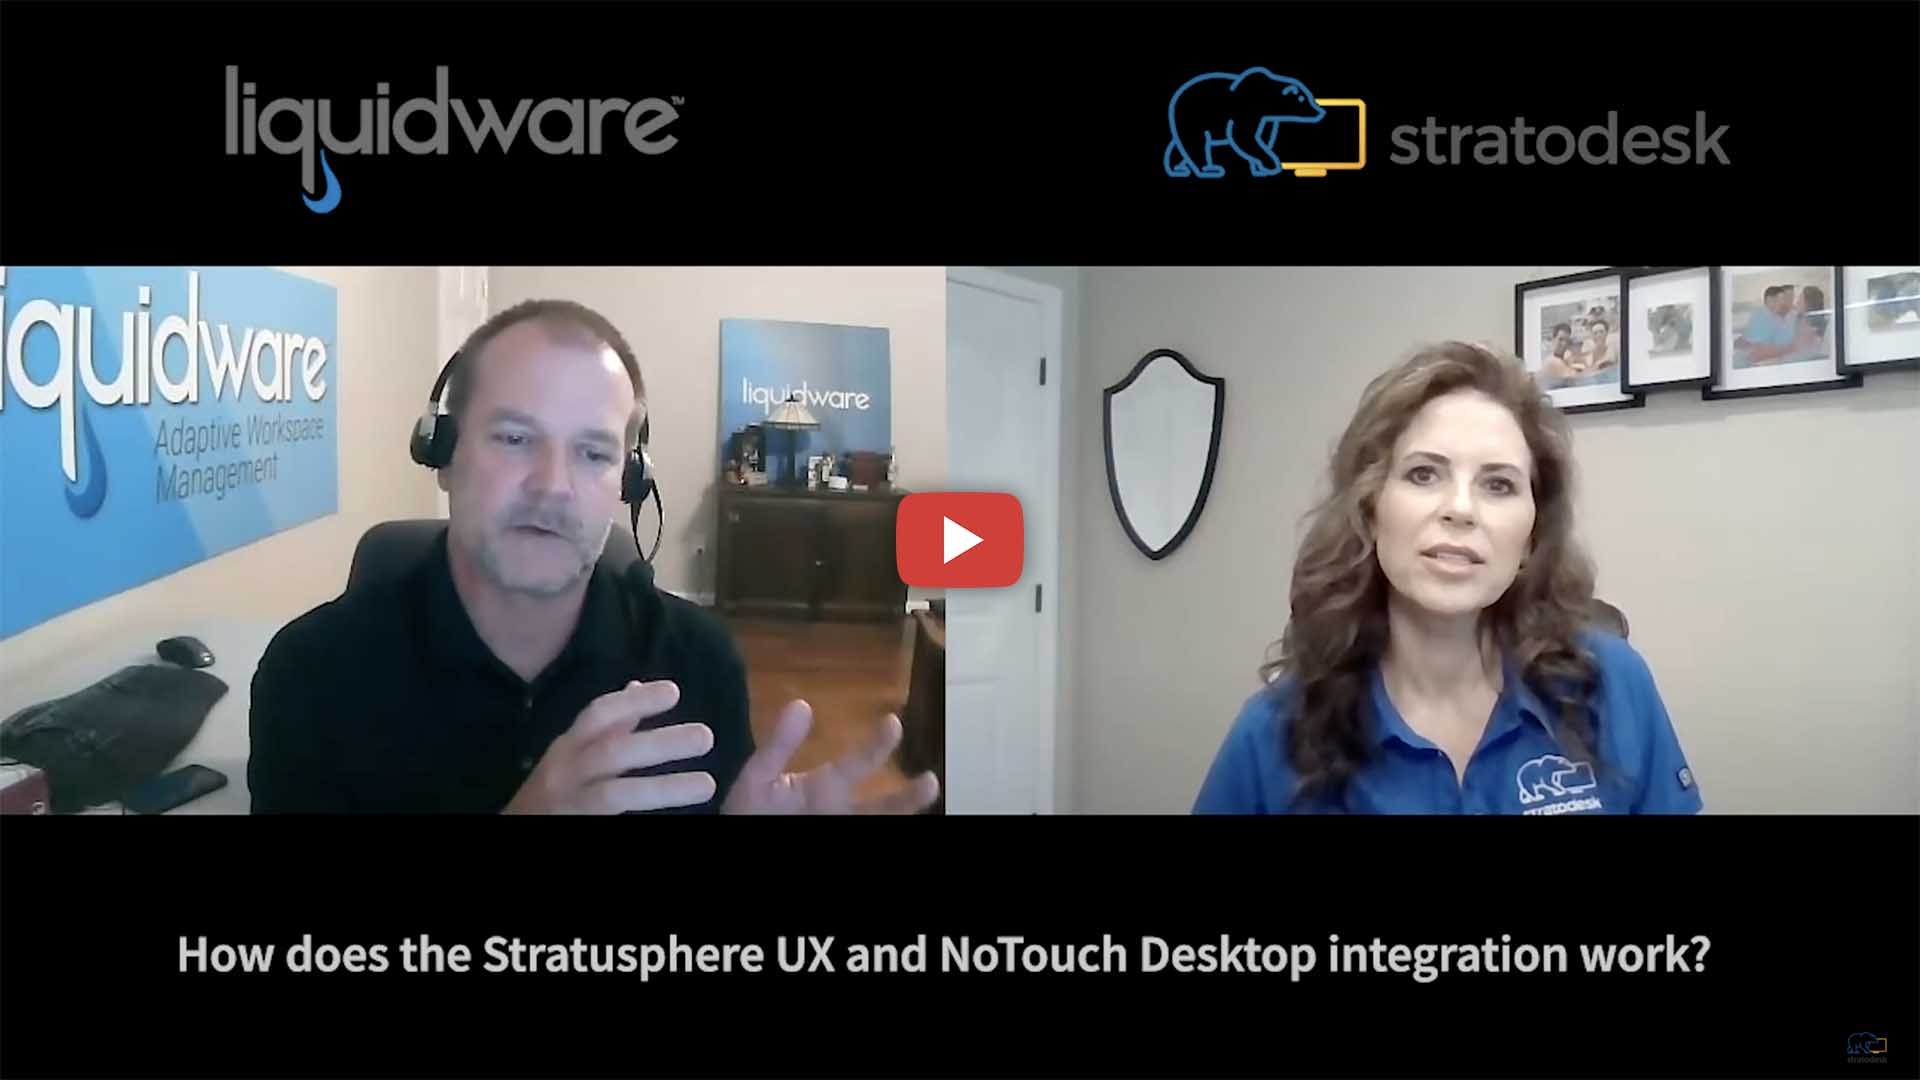 Stratodesk and Liquidware software for work from home